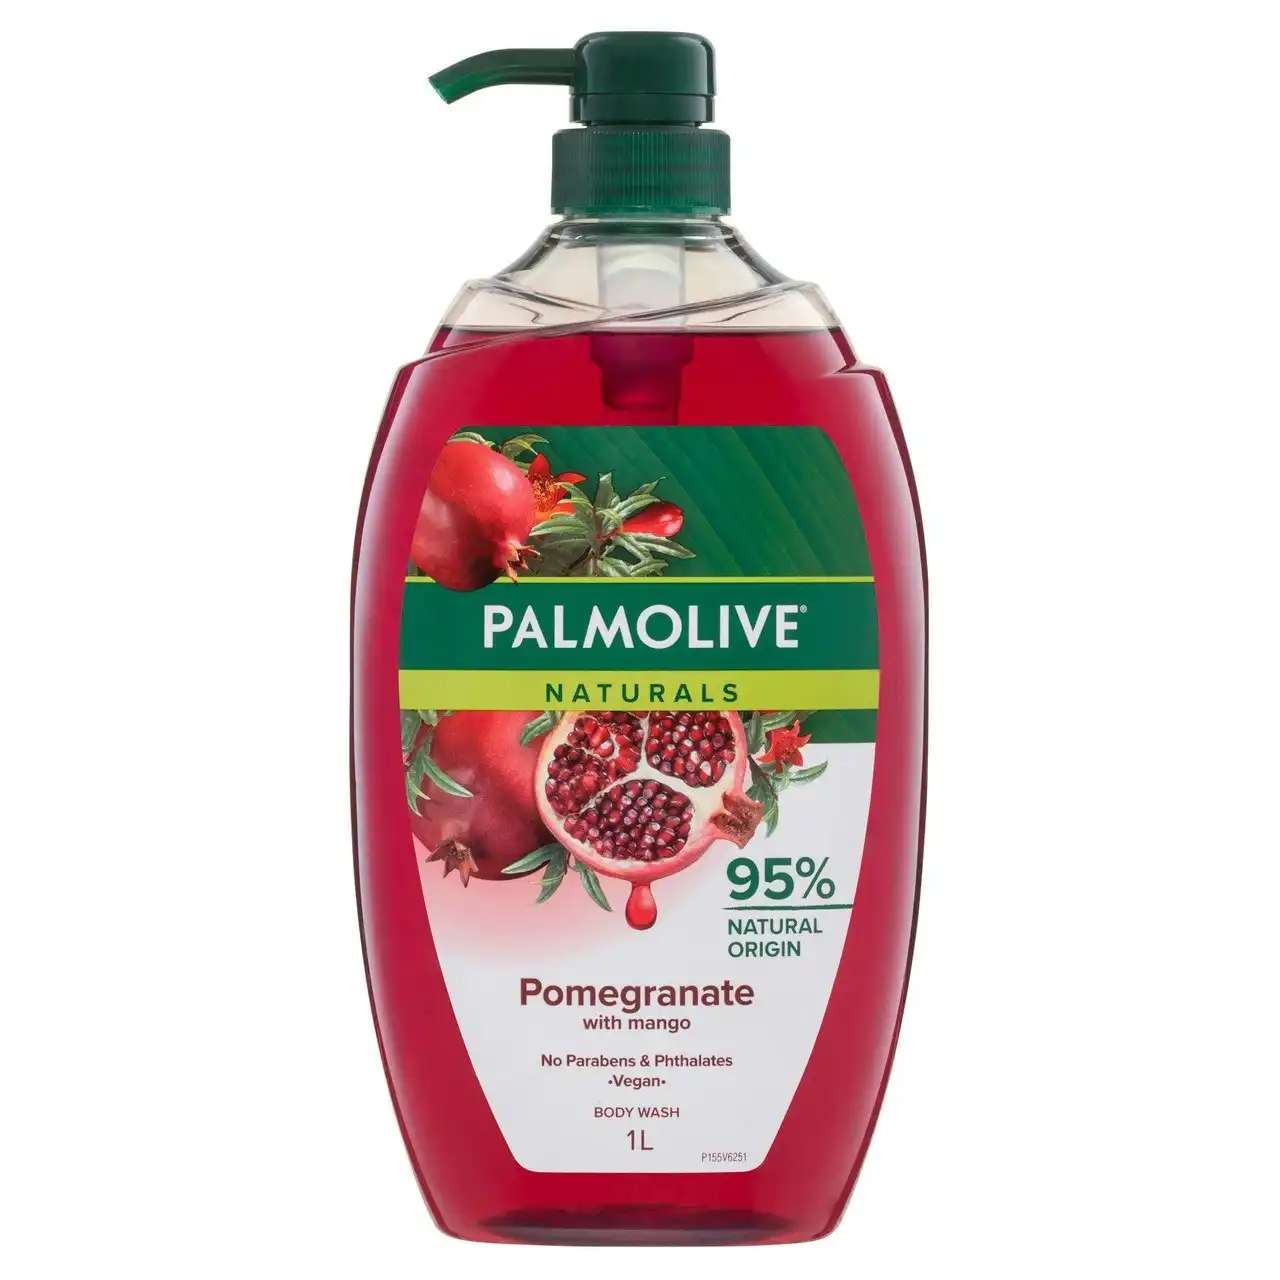 Palmolive Naturals Body Wash 1L, Pomegranate with Mango, Soap Free Shower Gel, No Parabens or Phthalates